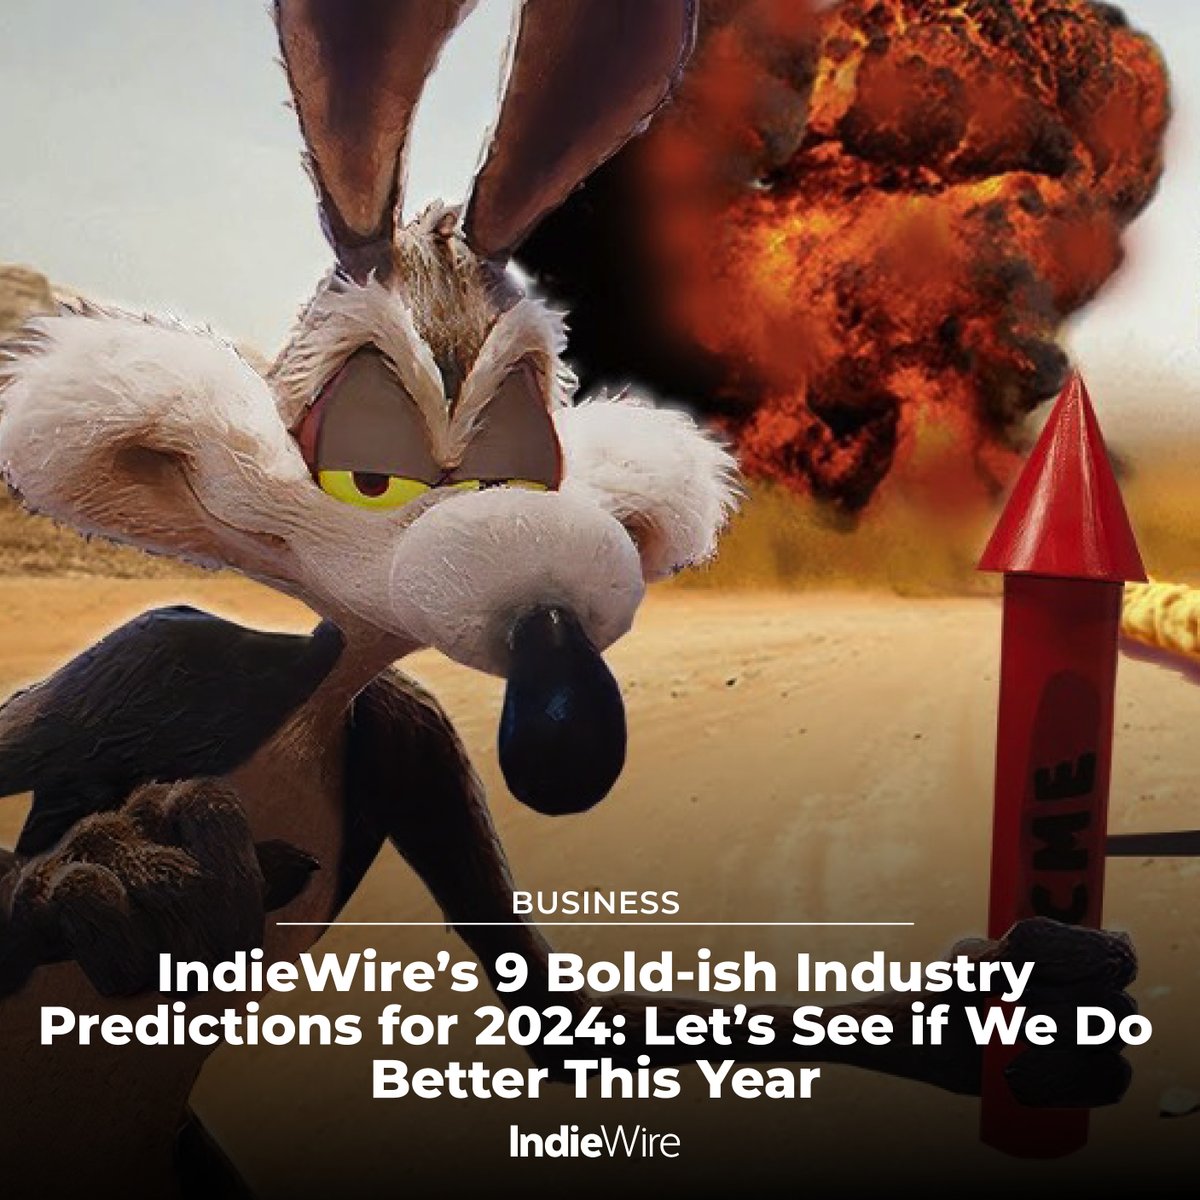 It’s time for IndieWire’s business team to dust off our crystal balls, put on our writing glasses, and go for broke in 2024. Below are our nine industry predictions for the new year, in varying degrees of boldness. Feel free to tell us where we’re wrong! trib.al/OlRTKxh